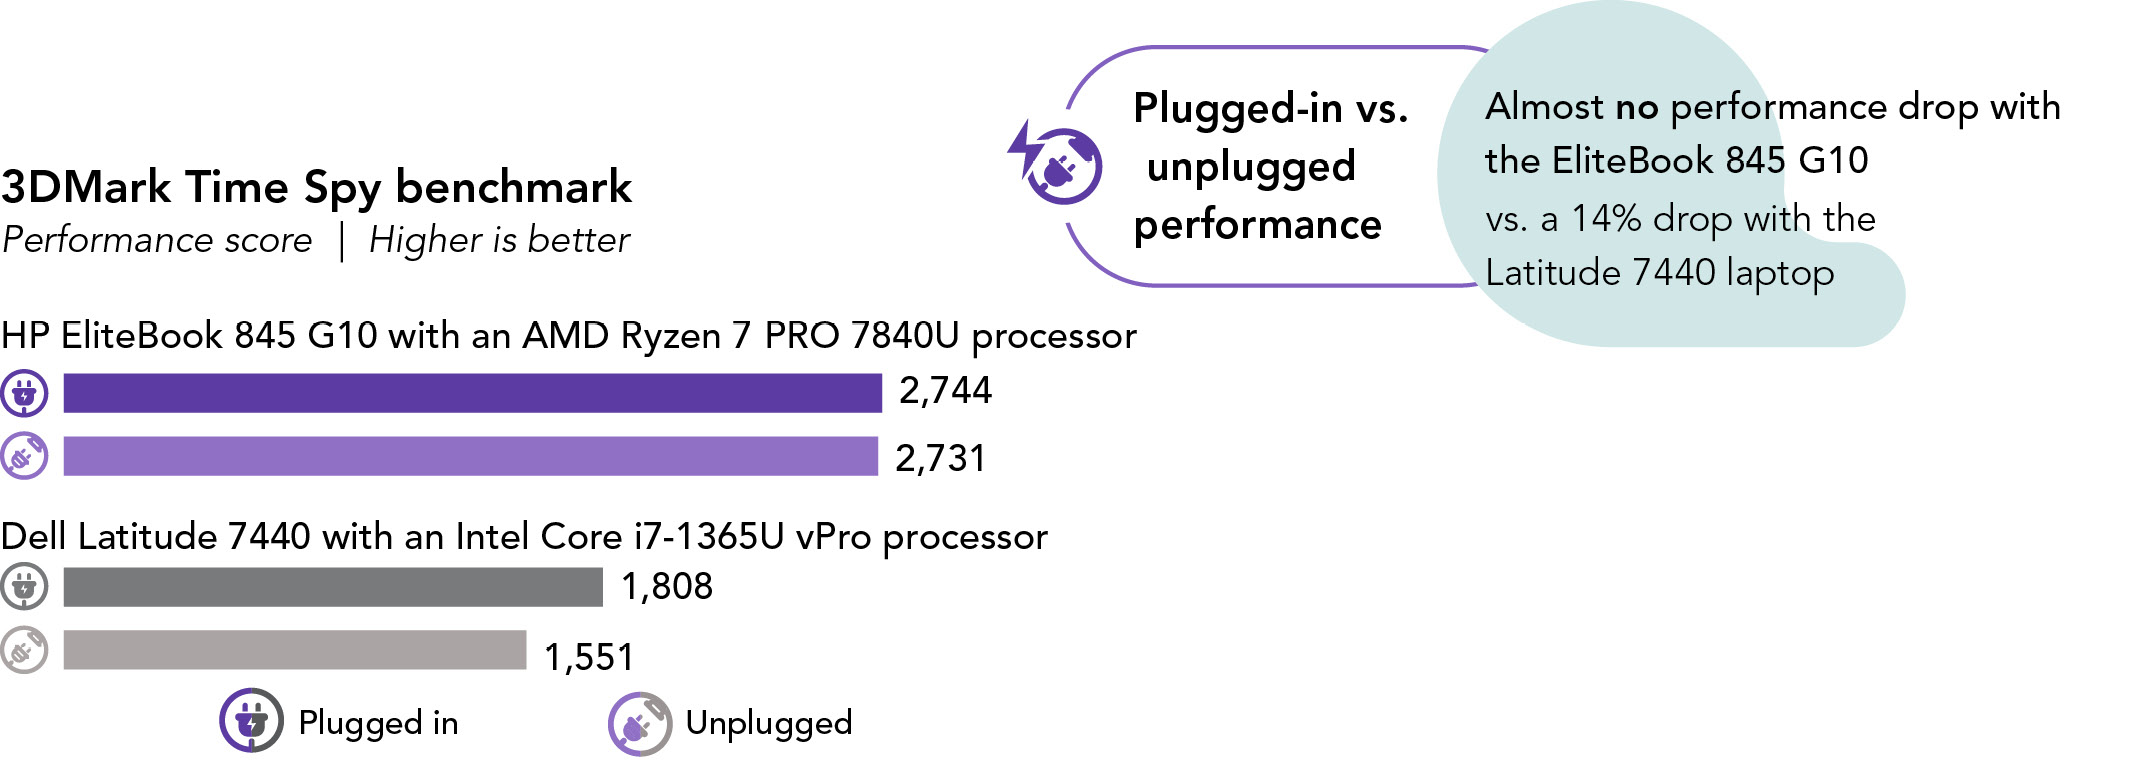 Chart showing 3Dmark Time Spy benchmark performance scores. Higher is better. HP EliteBook 845 G10 shows a score of 2,744 plugged in and 2,731 unplugged. Dell Latitude 7440 shows a score of 1,808 plugged in and 1,551 unplugged. Plugged-in vs. unplugged performance: Almost no performance drop with the EliteBook 845 G10 vs. a 14% drop with the Latitude 7440 laptop.